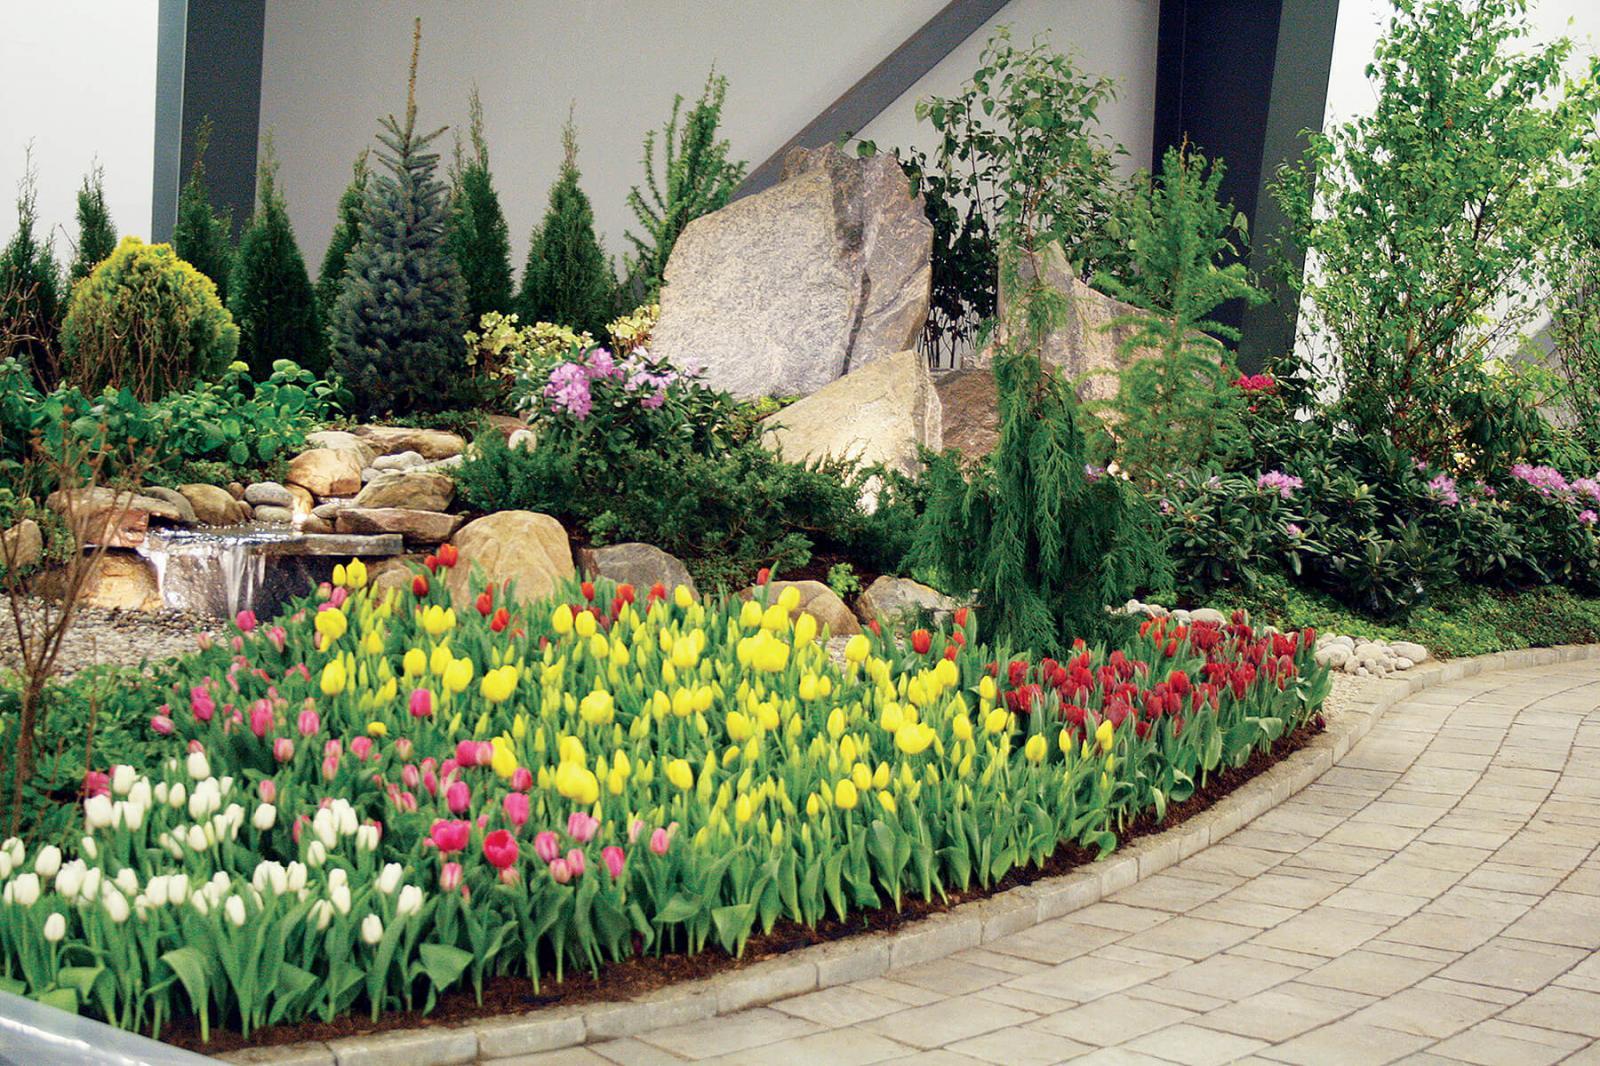 A collaborative team effort by Ottawa Chapter created a colourful one-of-a-kind garden at the Ottawa Home and Garden Show.